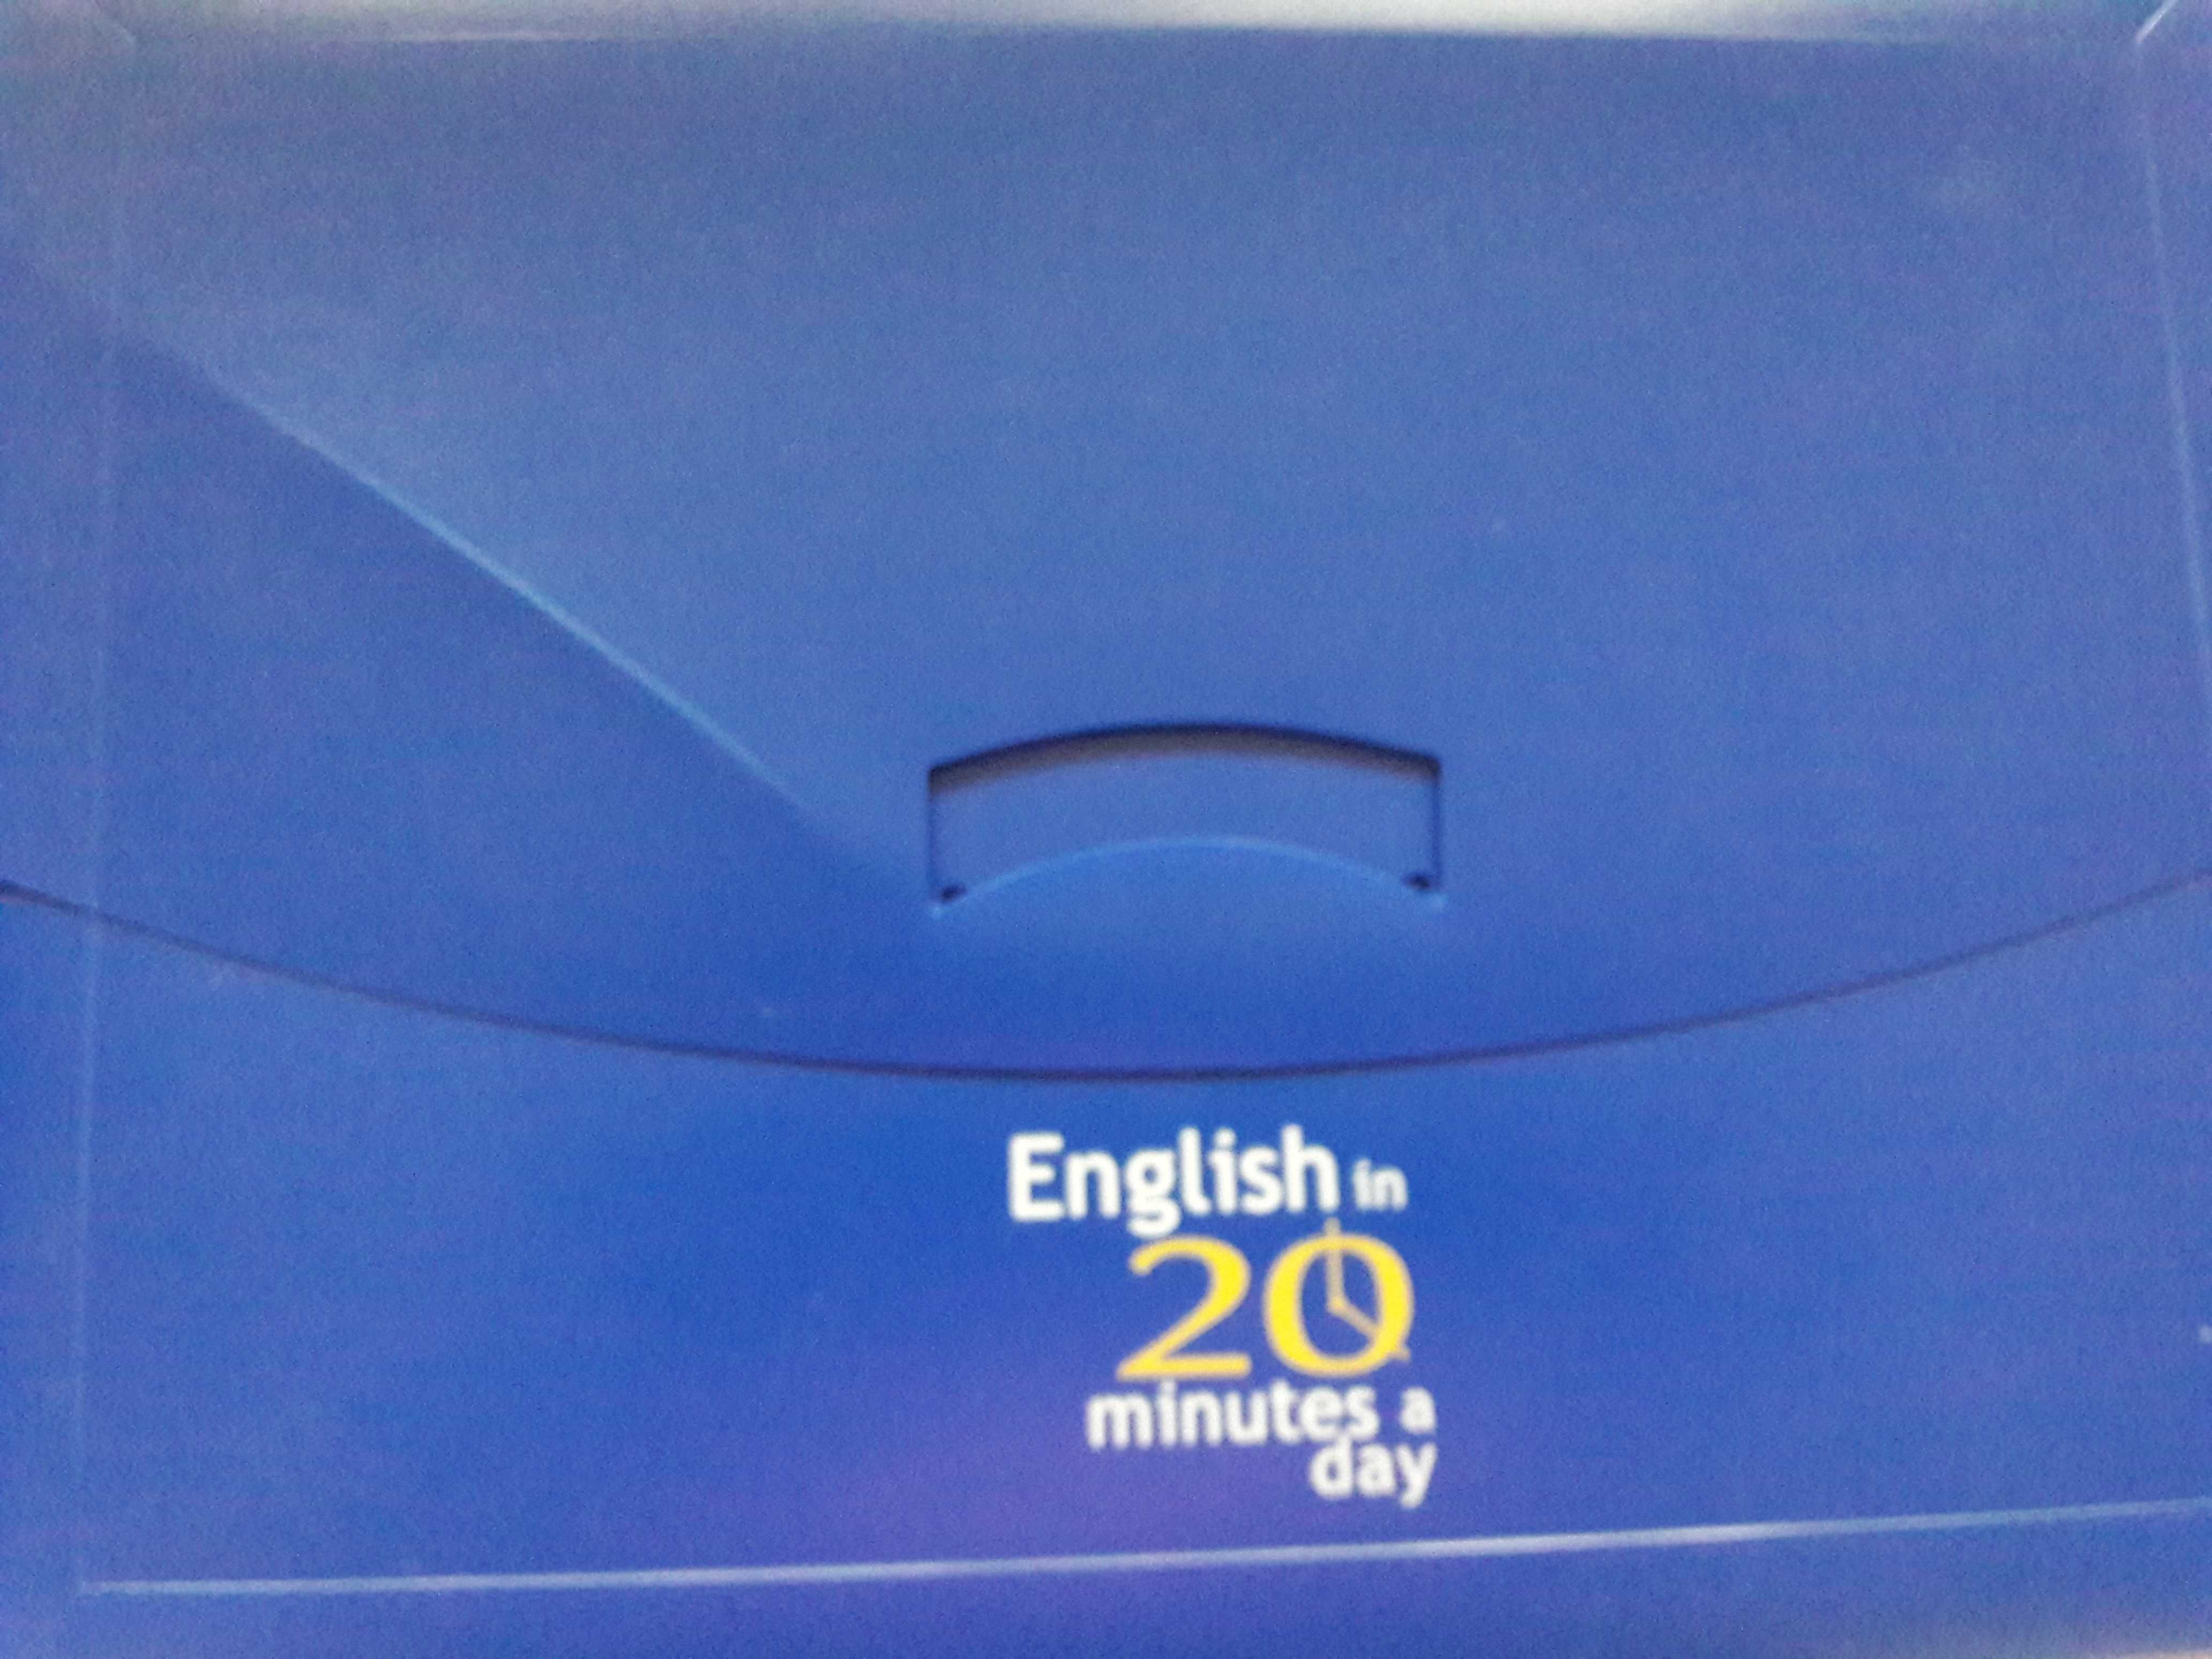 English in 20 Minutes a Day Reader's Digest